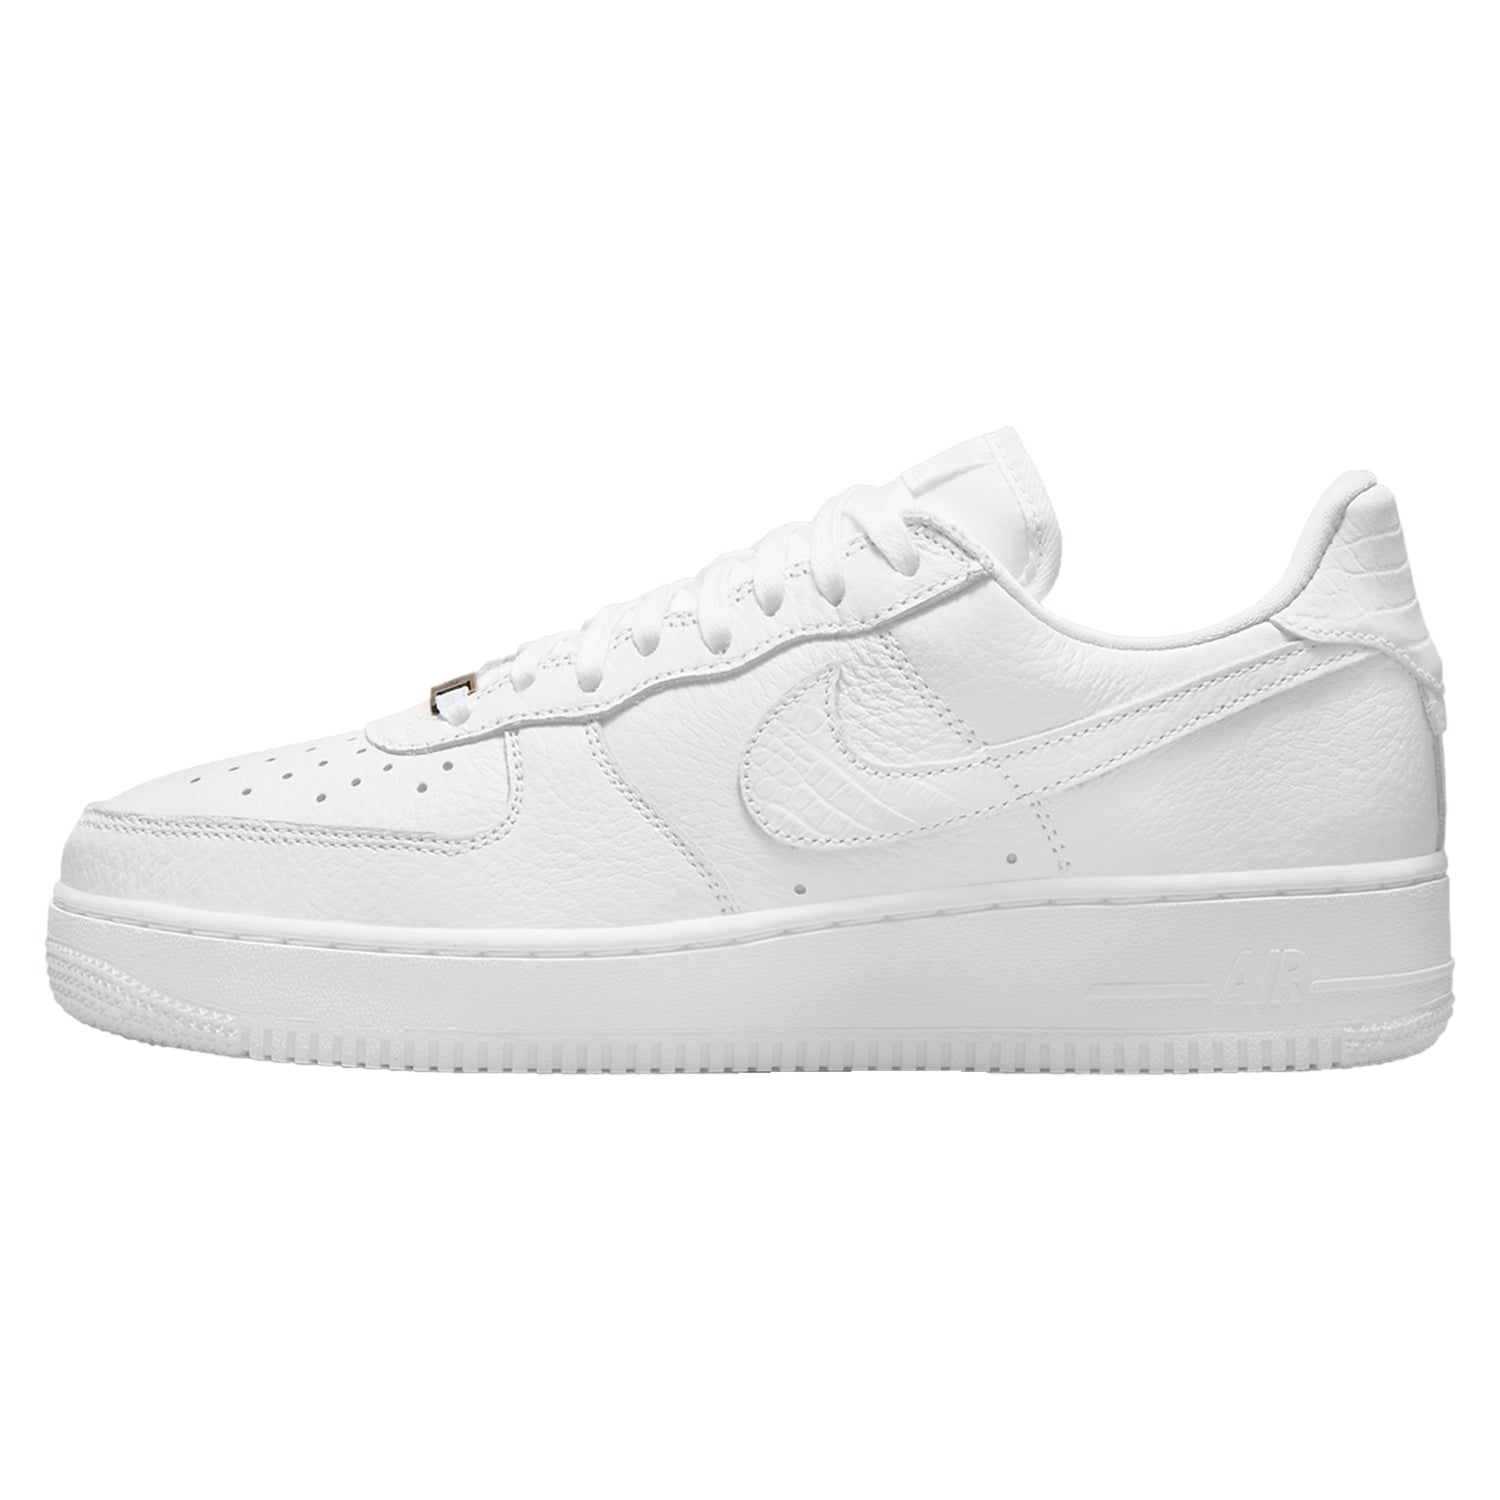 Nike Air Force 1 Low '07 Craft Quadruple White